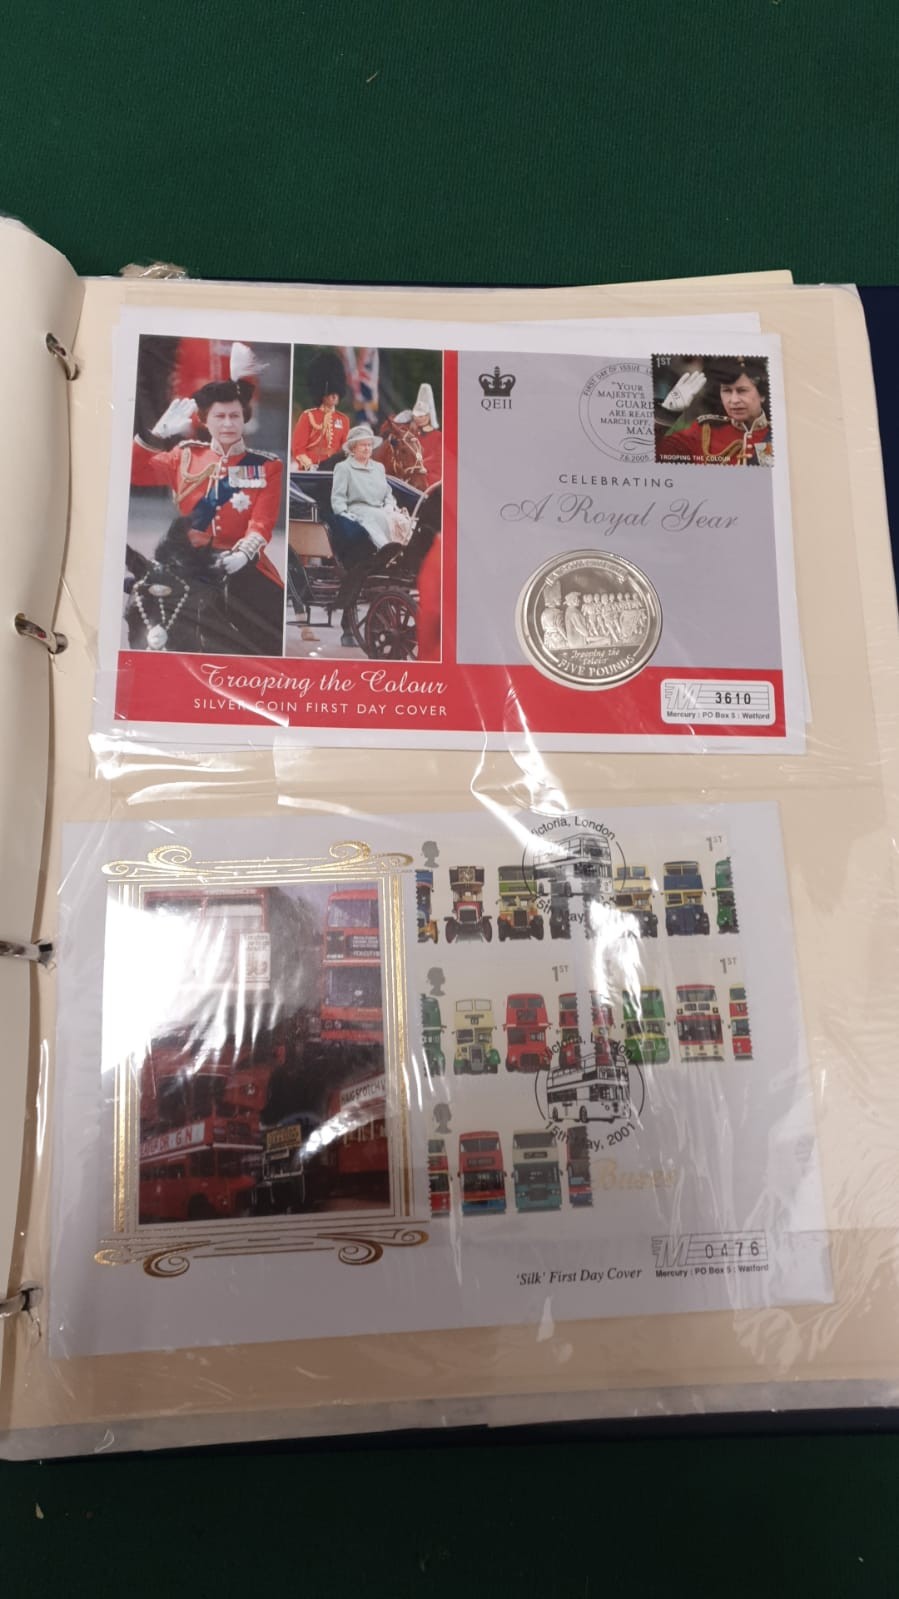 Princess Diana Ist Day Cover Album With Coins Ect - Image 8 of 9